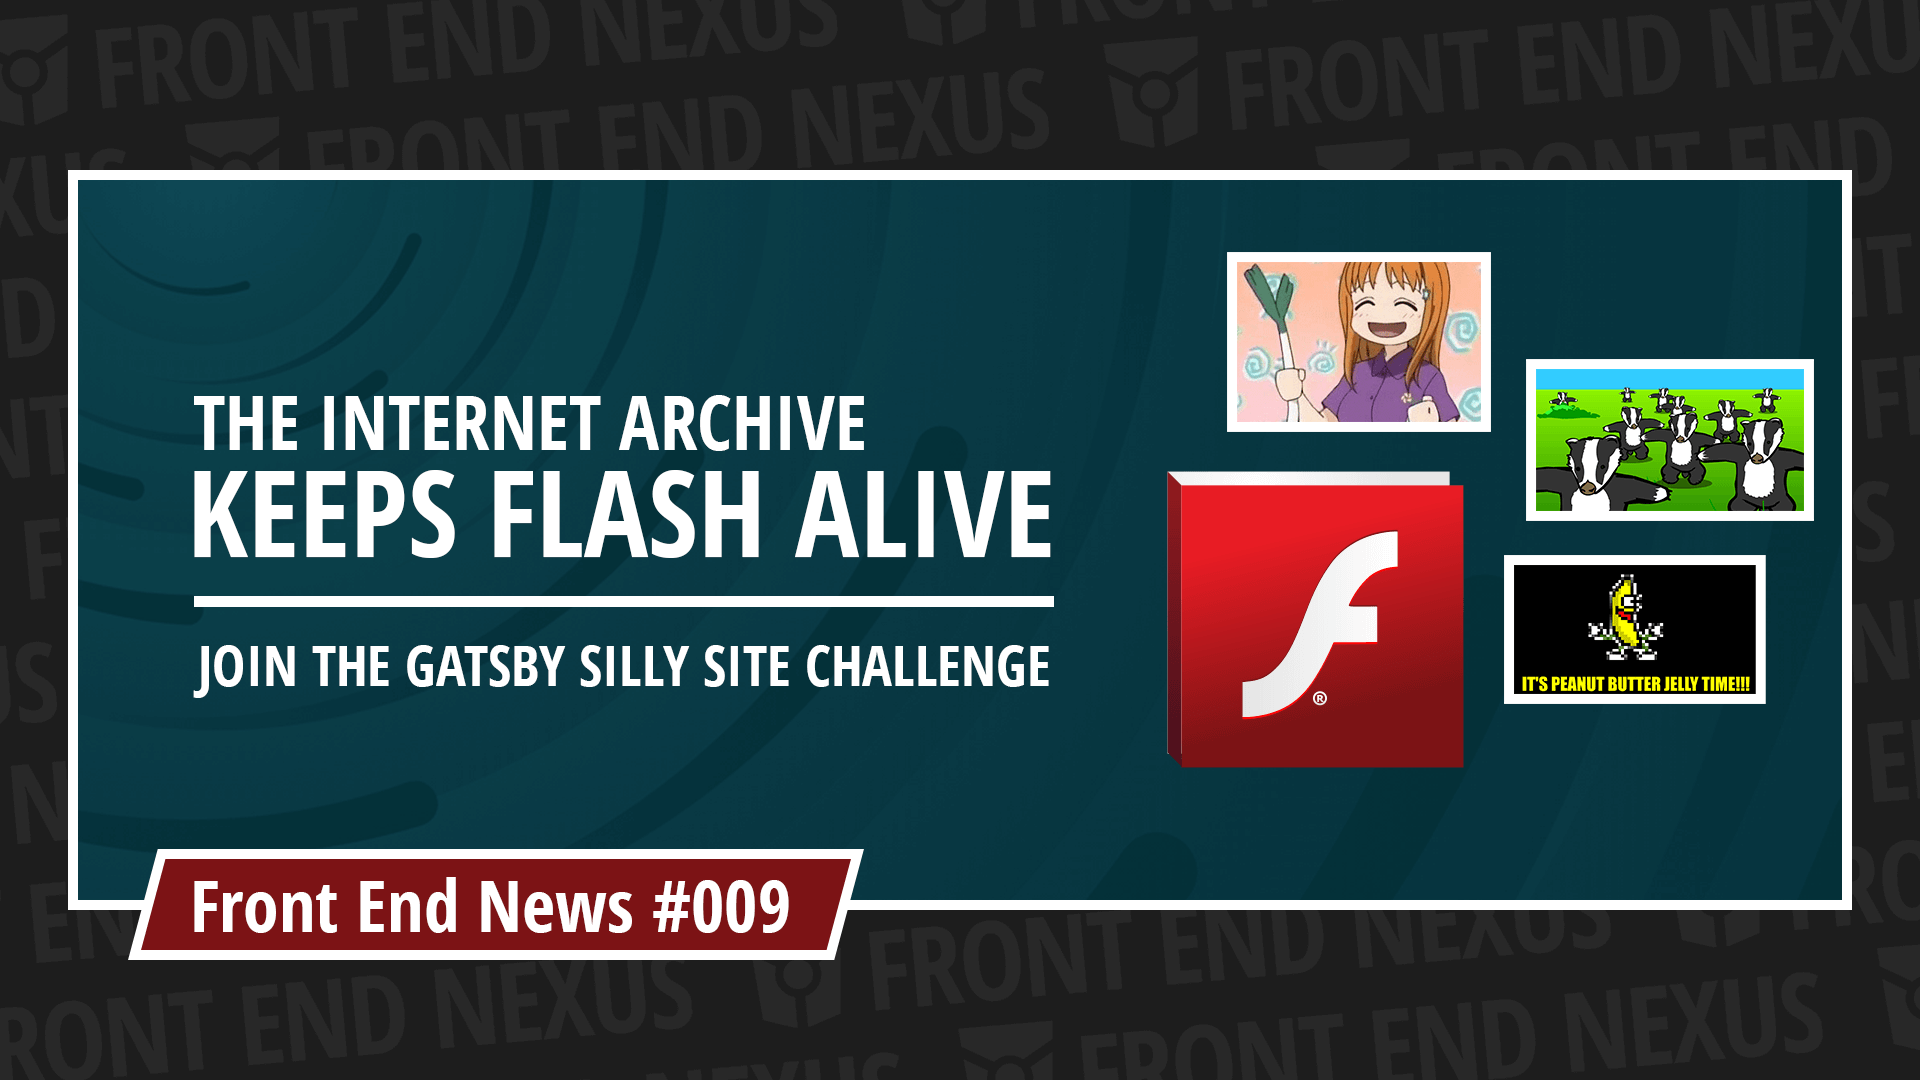 Flash Animations Live Forever at the Internet Archive and the Gatsby Silly Site Challenge | Front End News #009